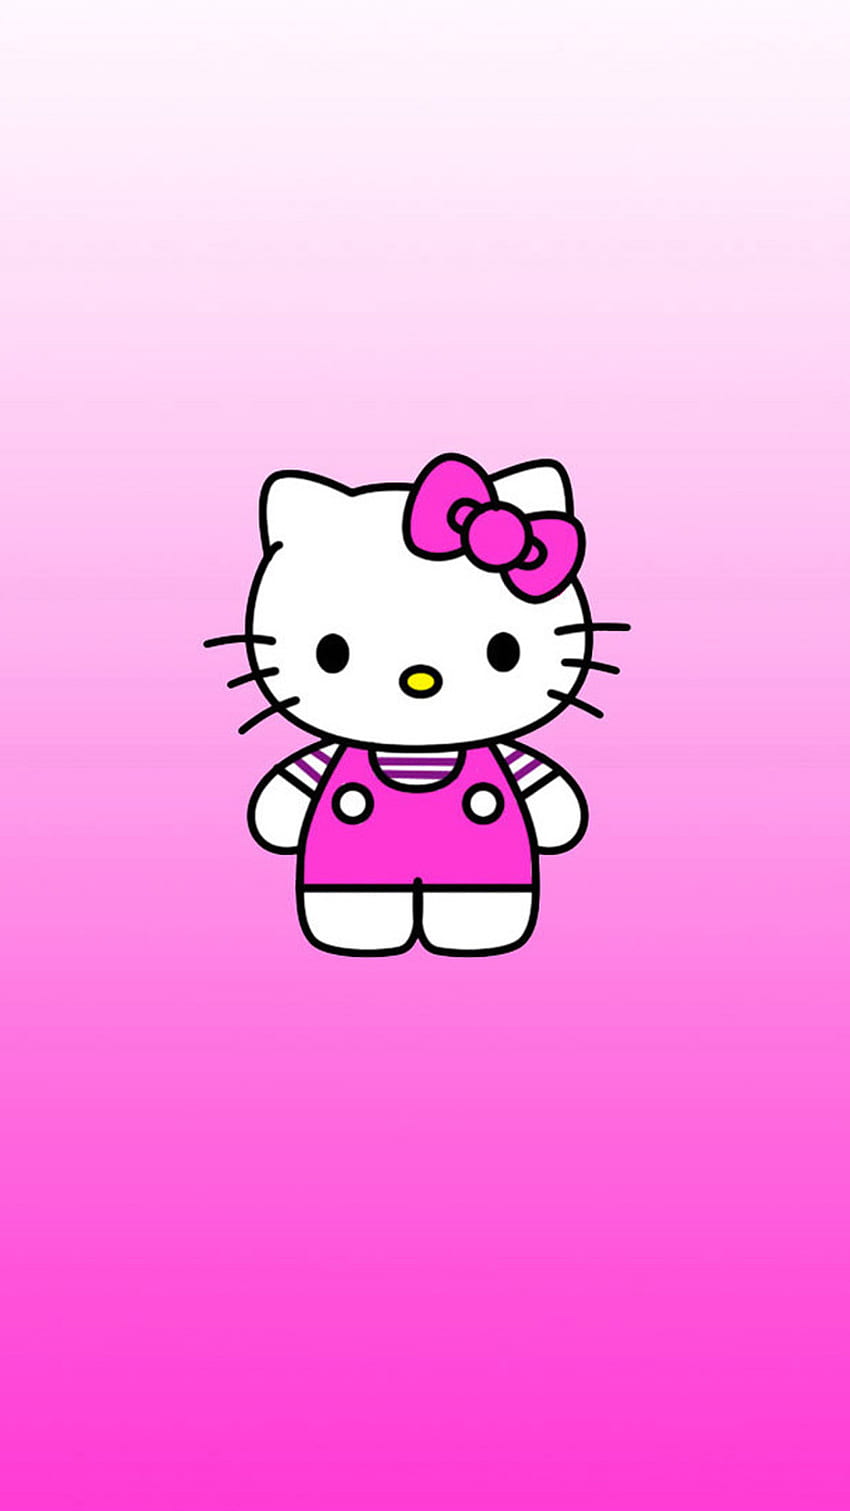 File attachment for Apple iPhone 6 Plus - Hello Kitty HD phone wallpaper